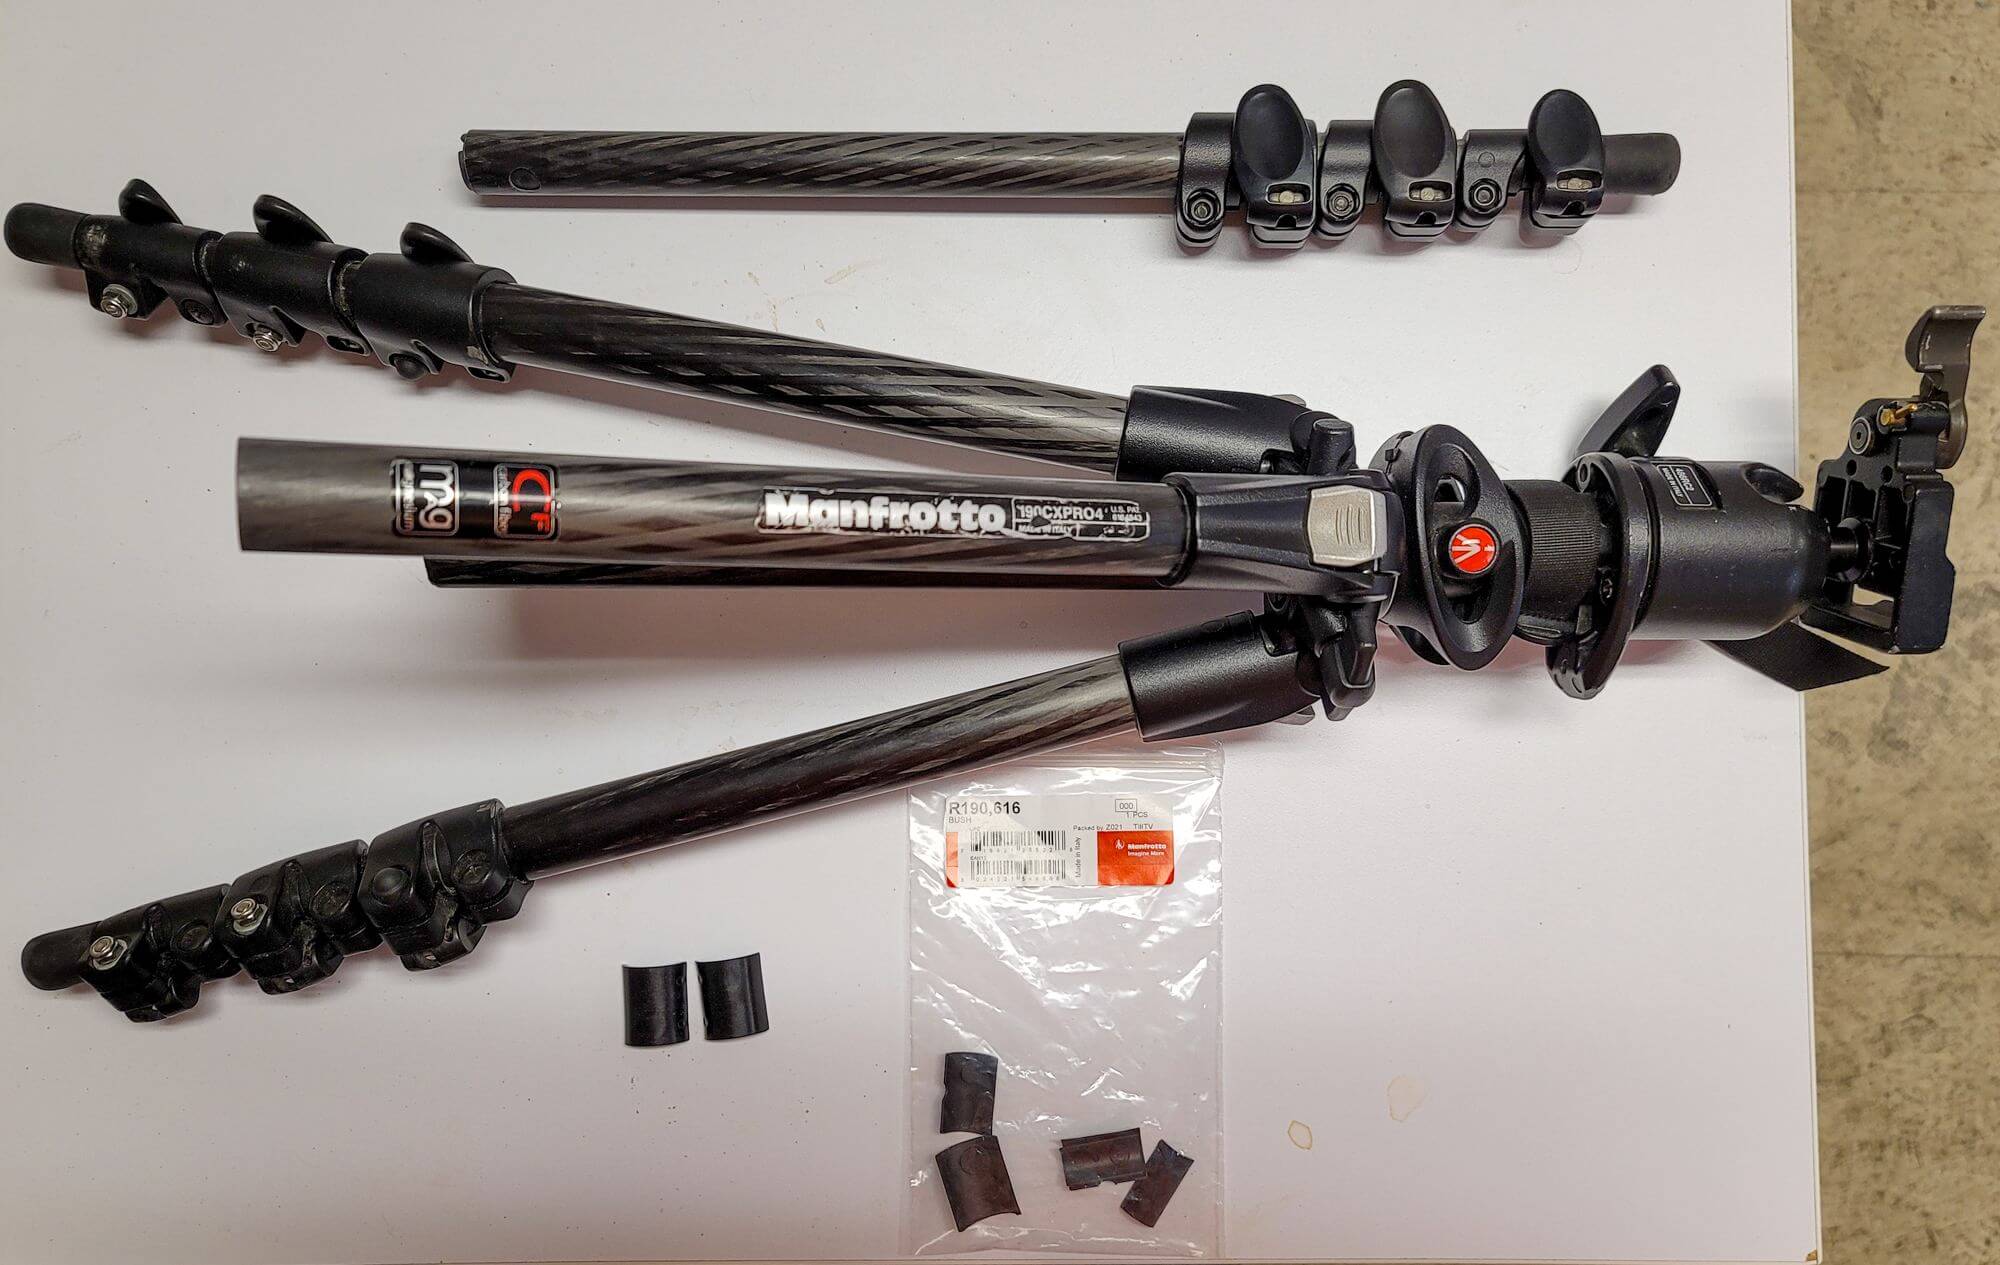 How to Get Spare Parts to Fix Your Manfrotto / Bogen Tripod for